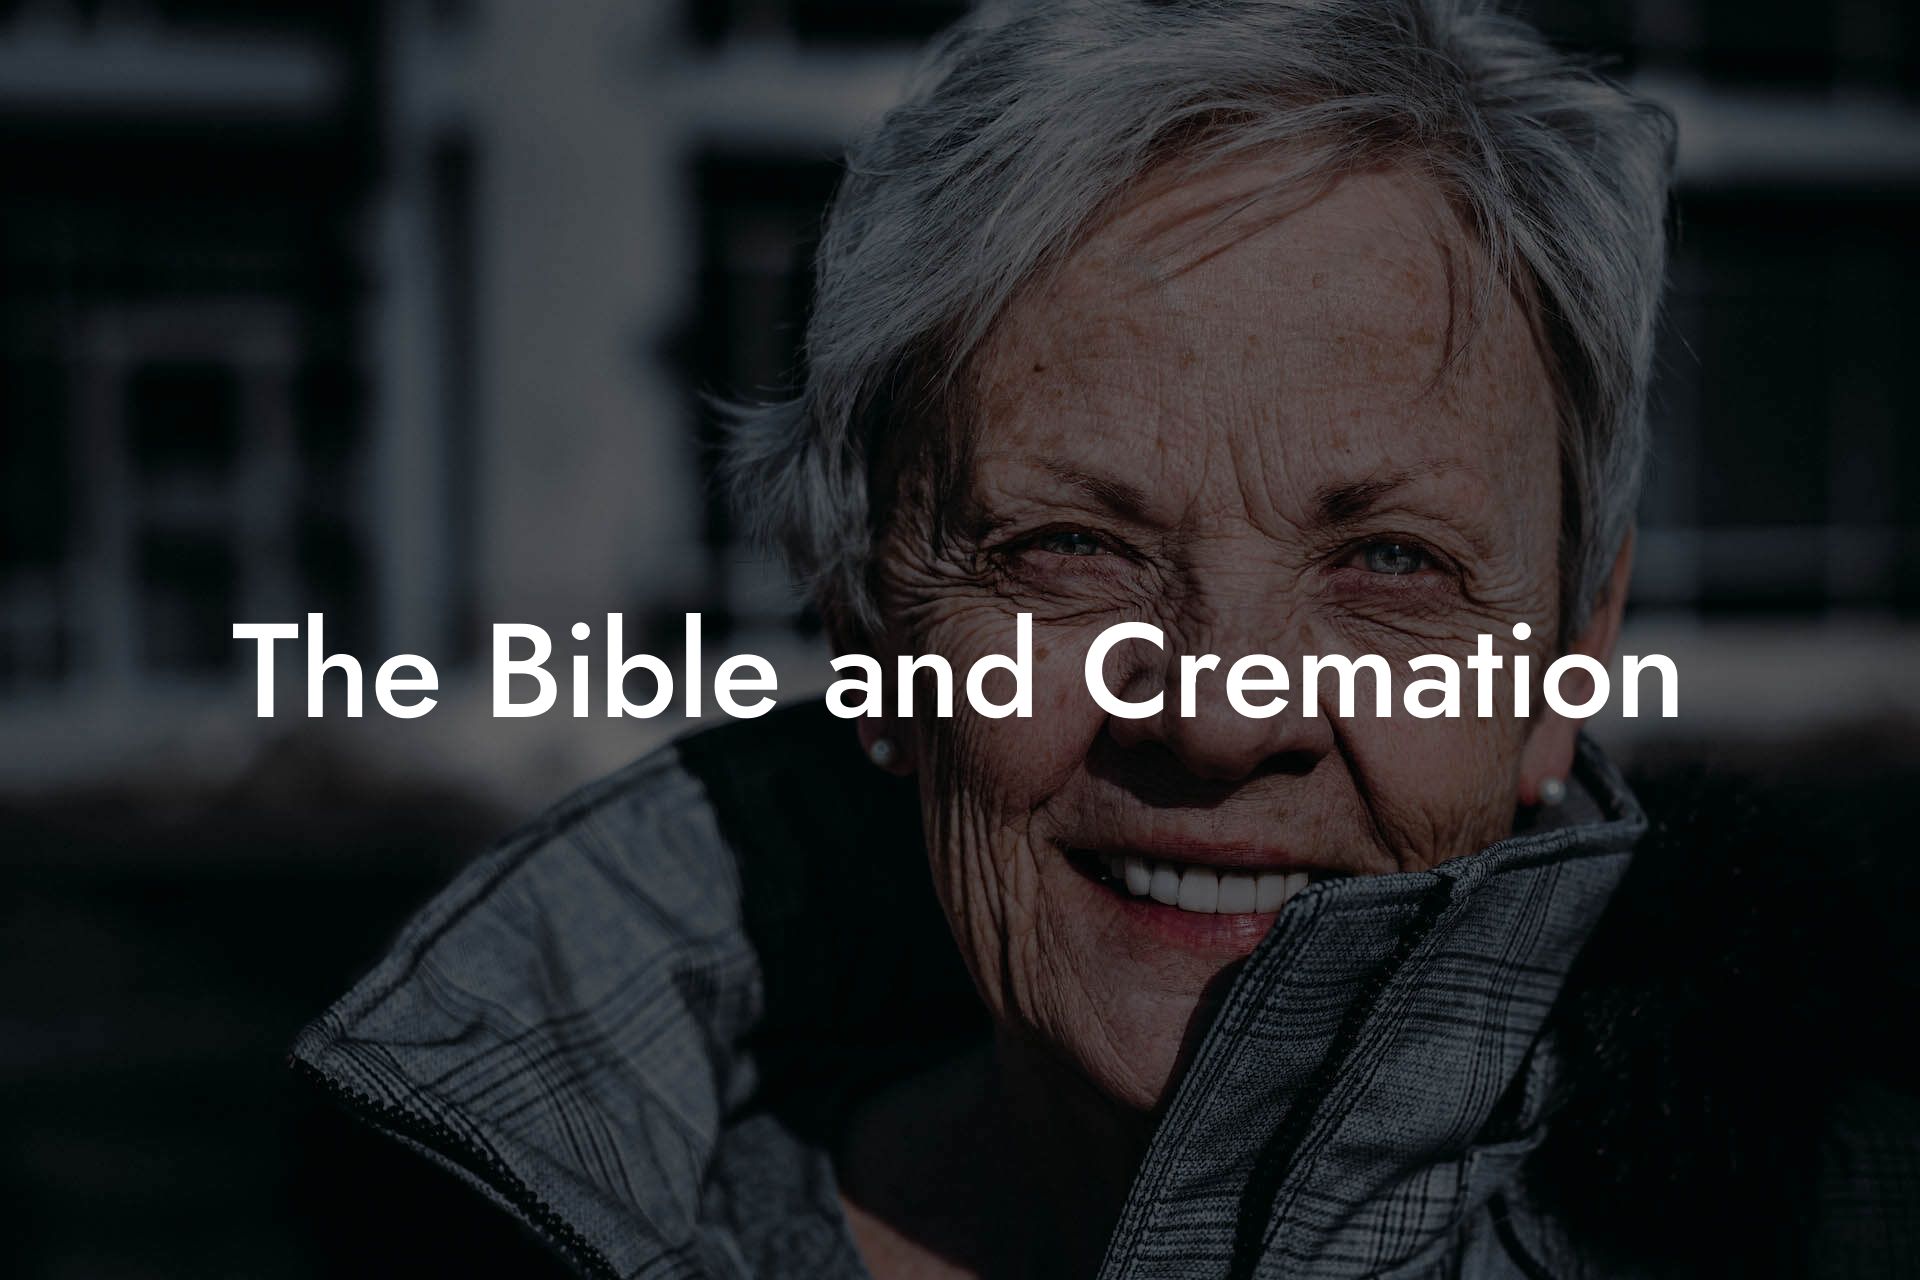 The Bible and Cremation